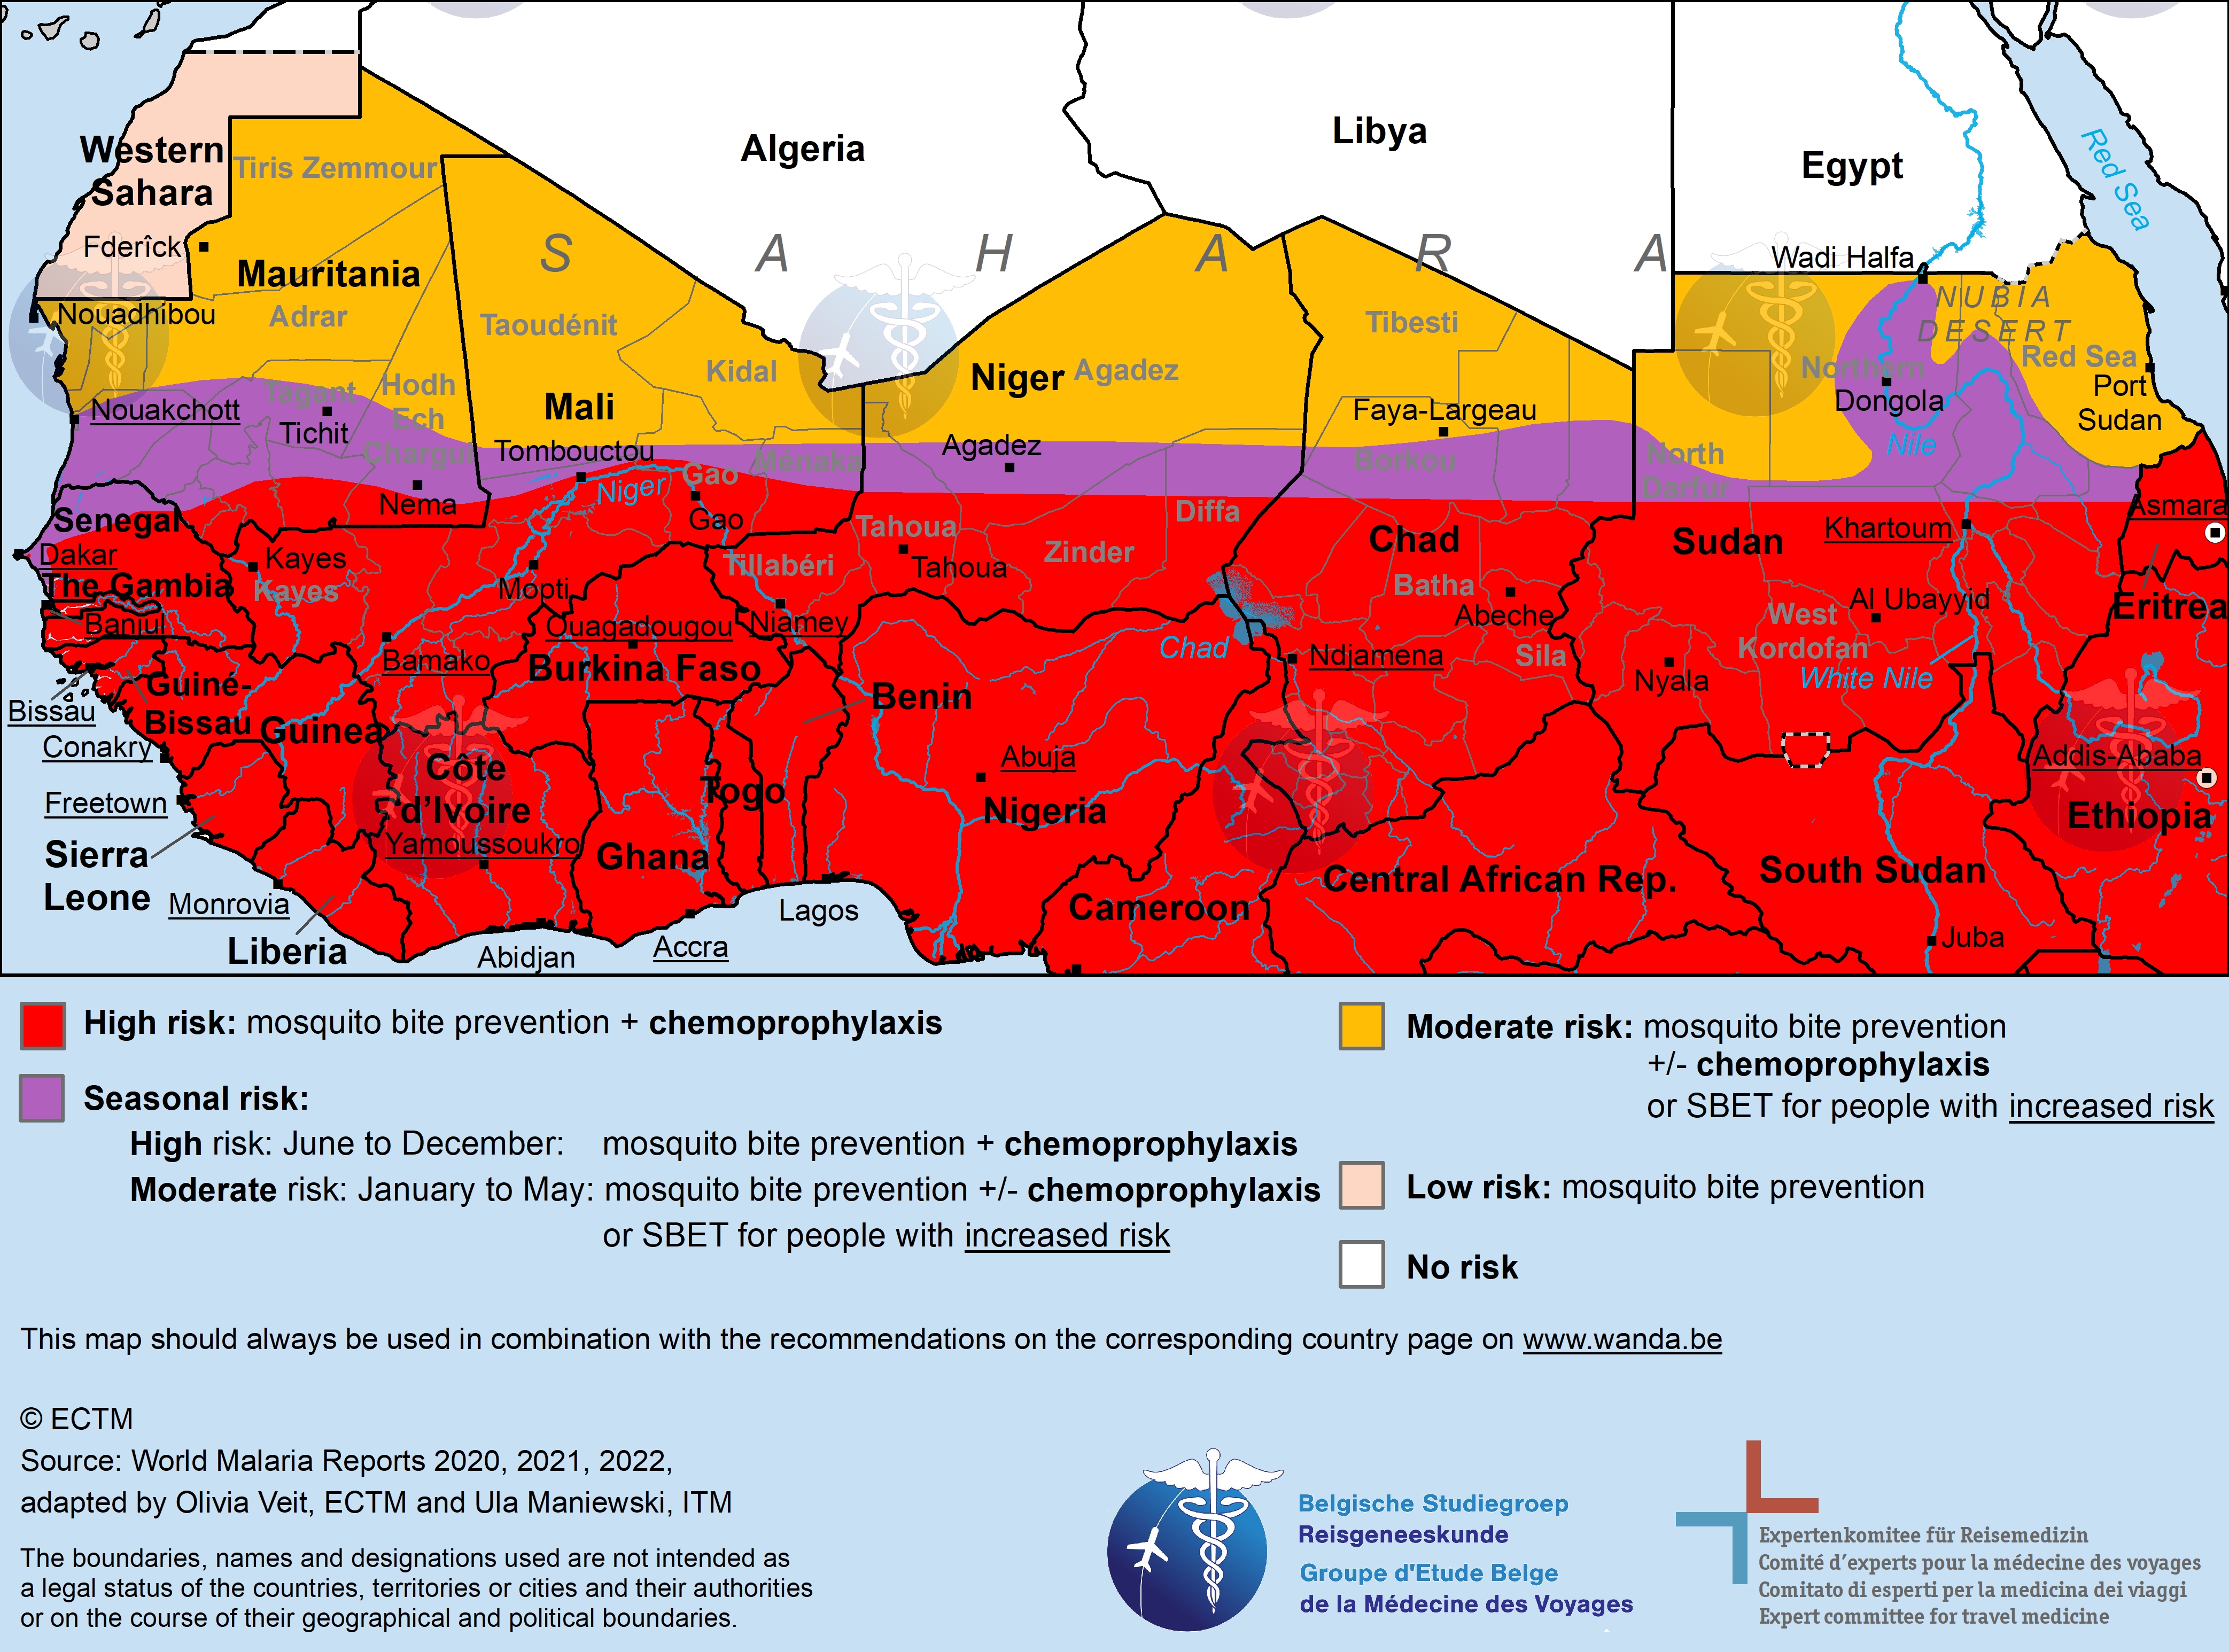 Map of Sahel with malaria risk areas